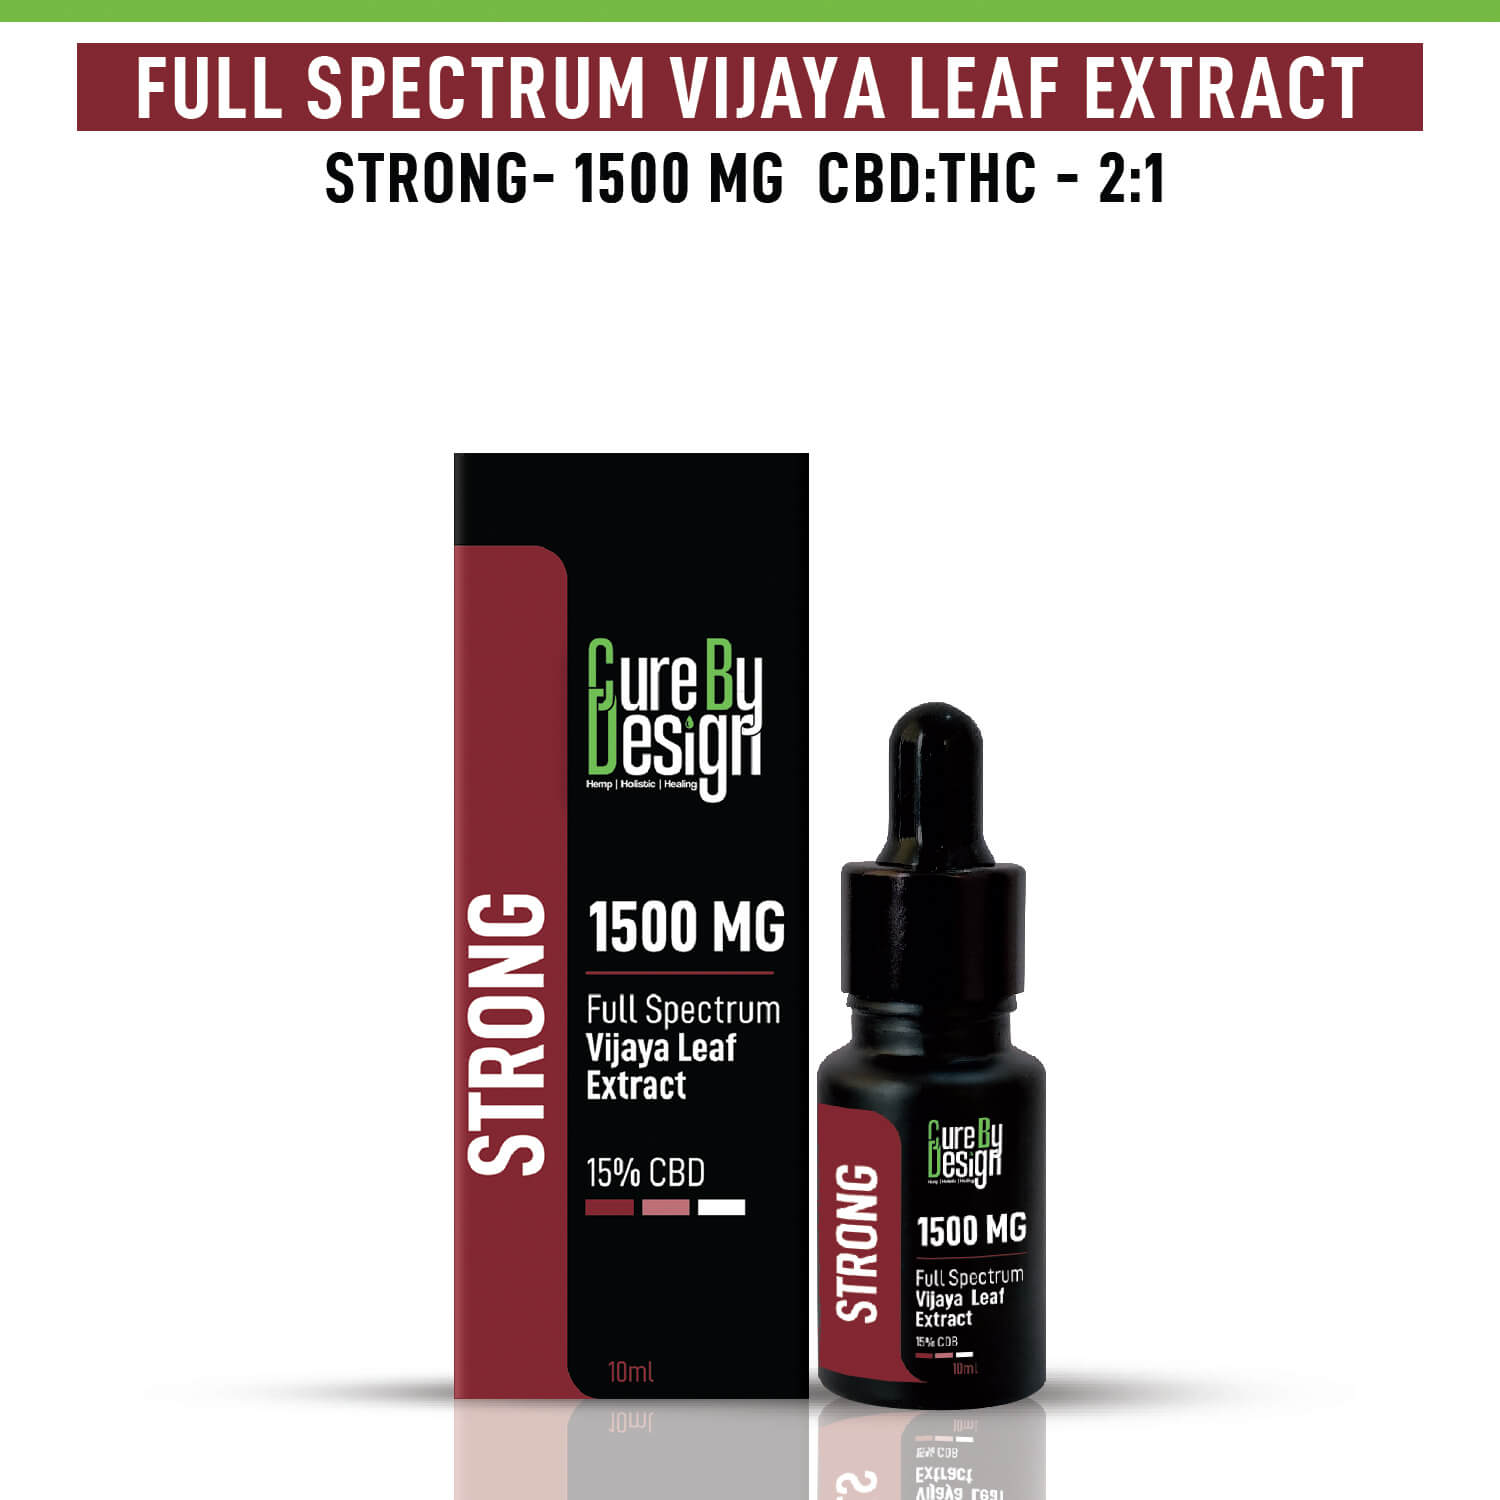 Cure By Design - Full-Spectrum Vijaya Leaf Extract, 1500 MG Strong - CBD Store India